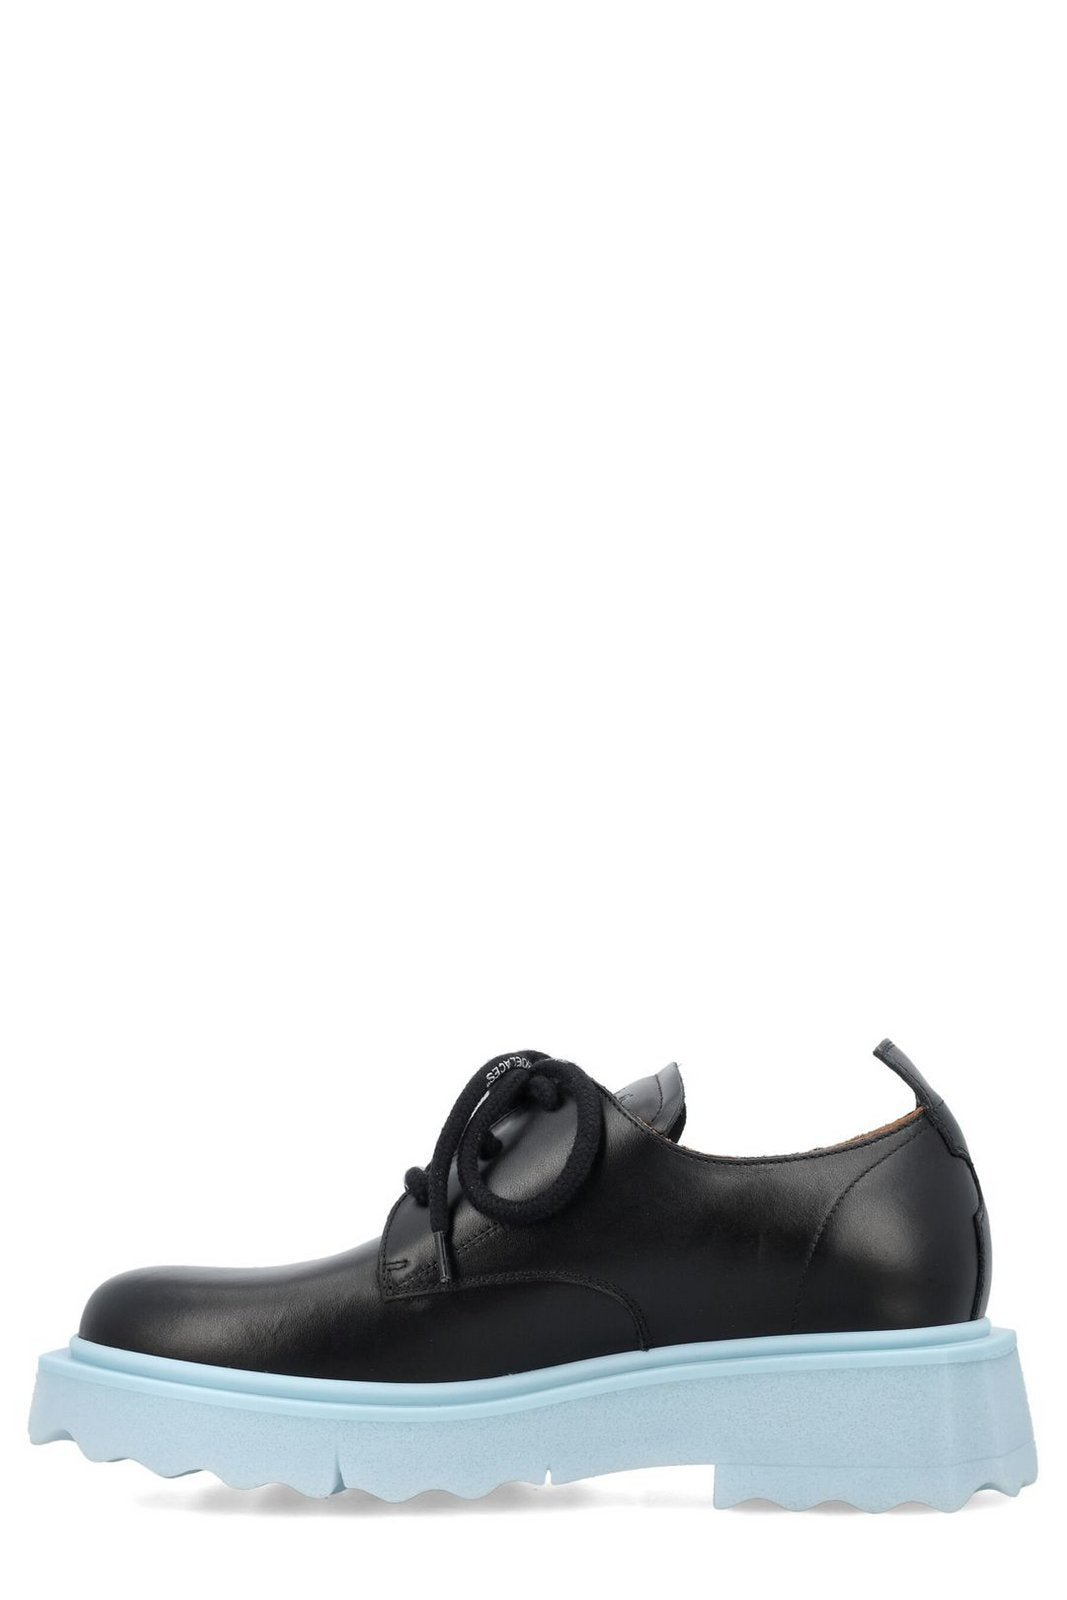 Off-White Round Toe Derby Shoes